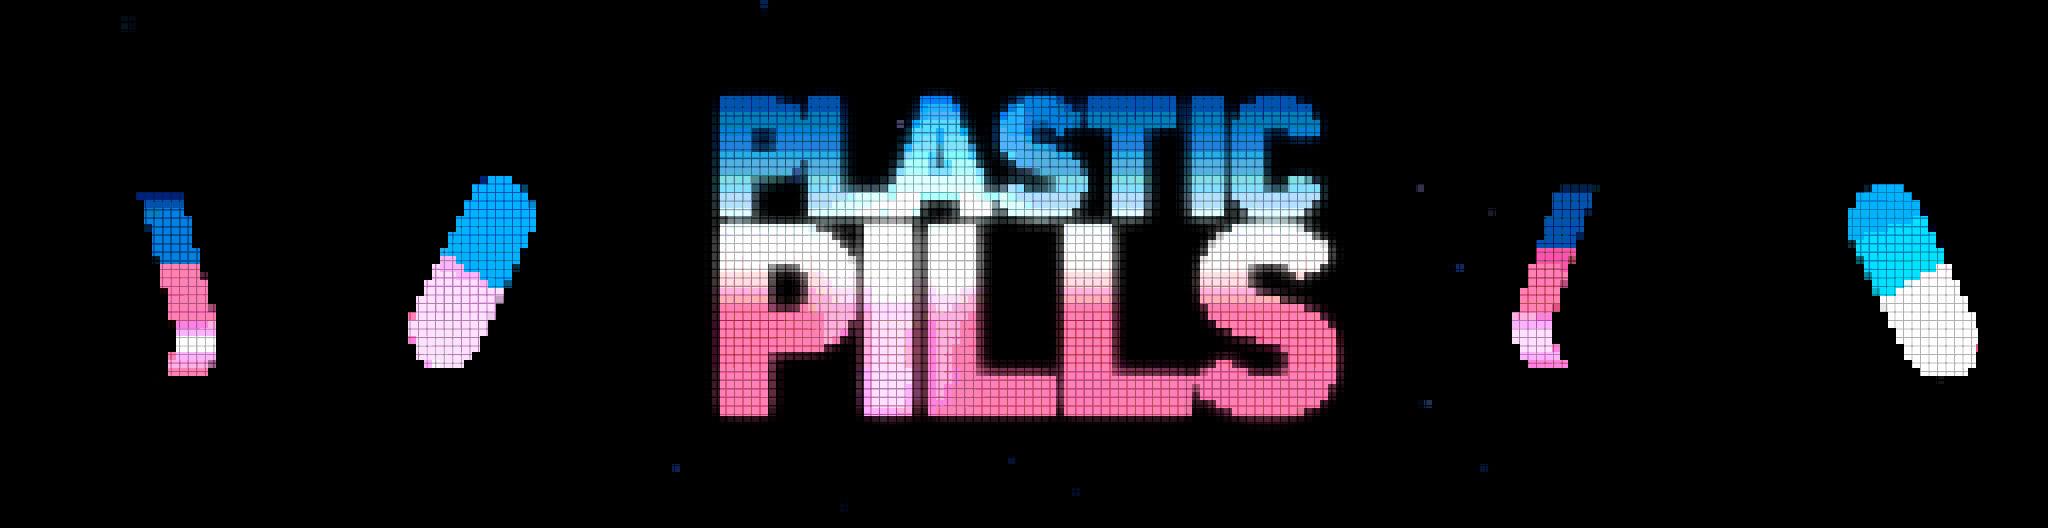 PlasticPills - Philosophy & Critical Theory Podcast